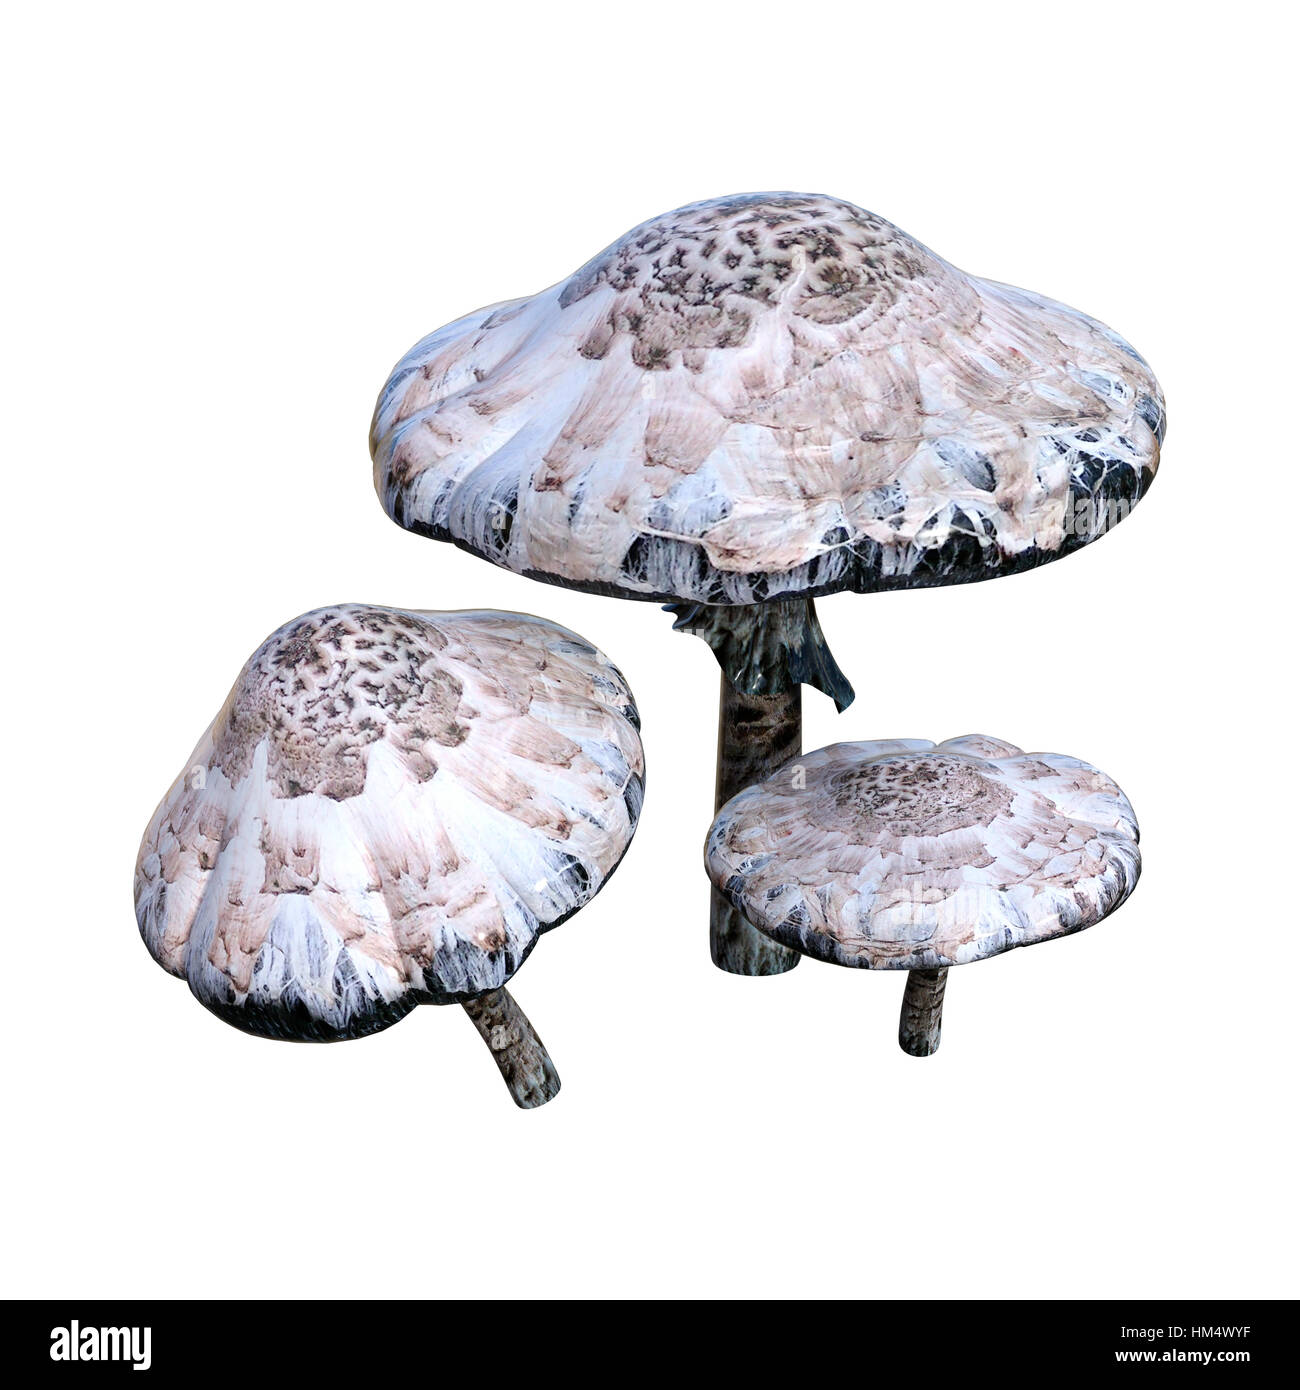 3D rendering of poisonous mushrooms isolated on white background Stock Photo